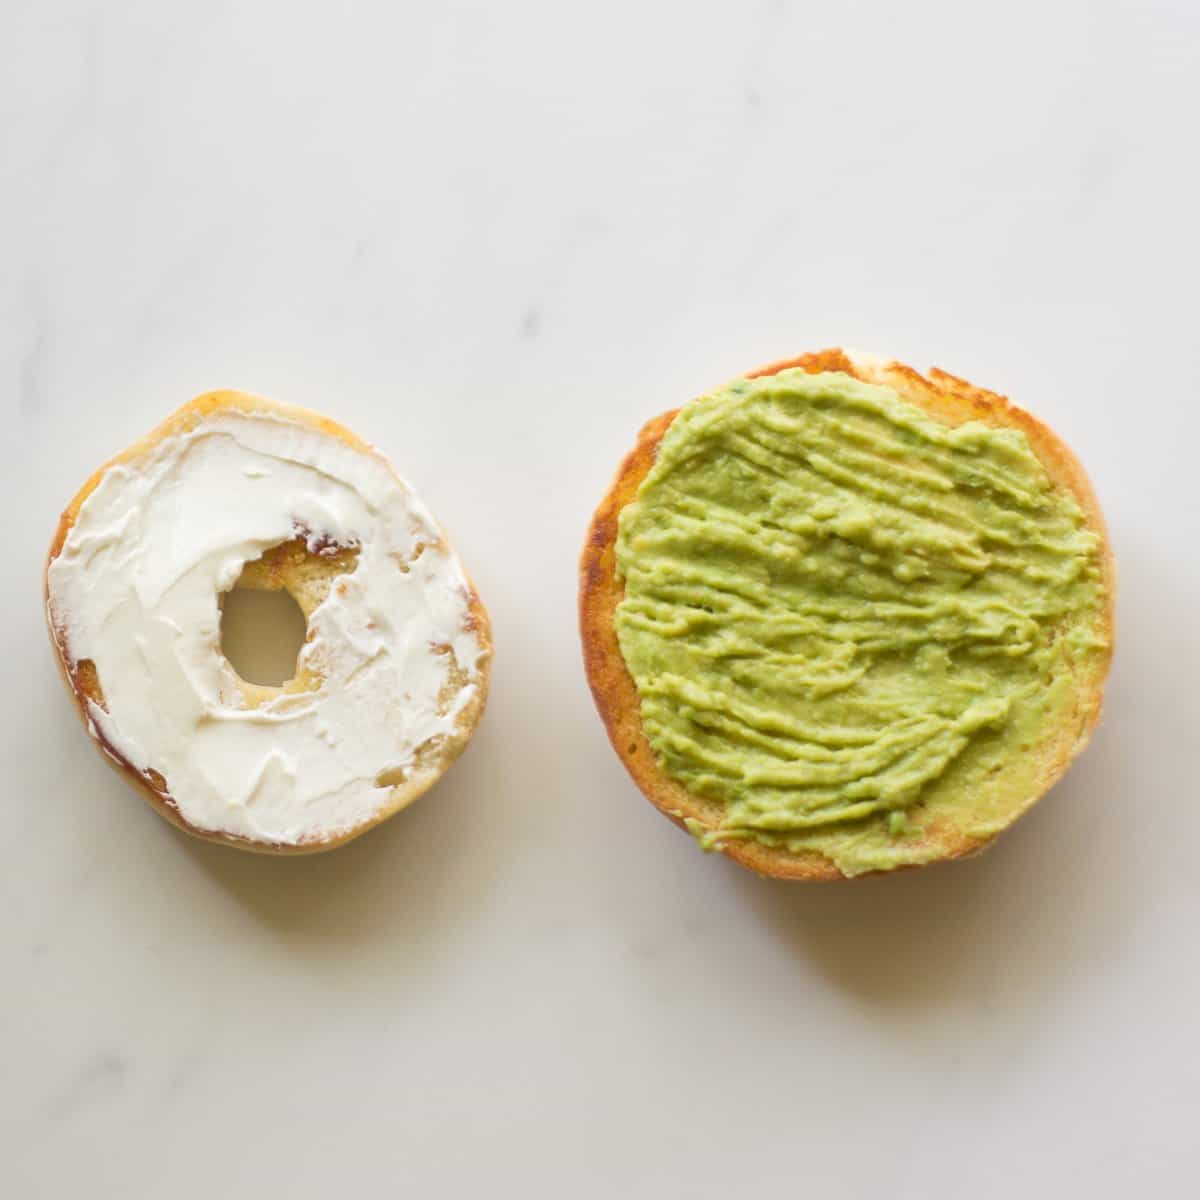 Mini bagel topped with cream cheese and brioche bun with mashed avocado.